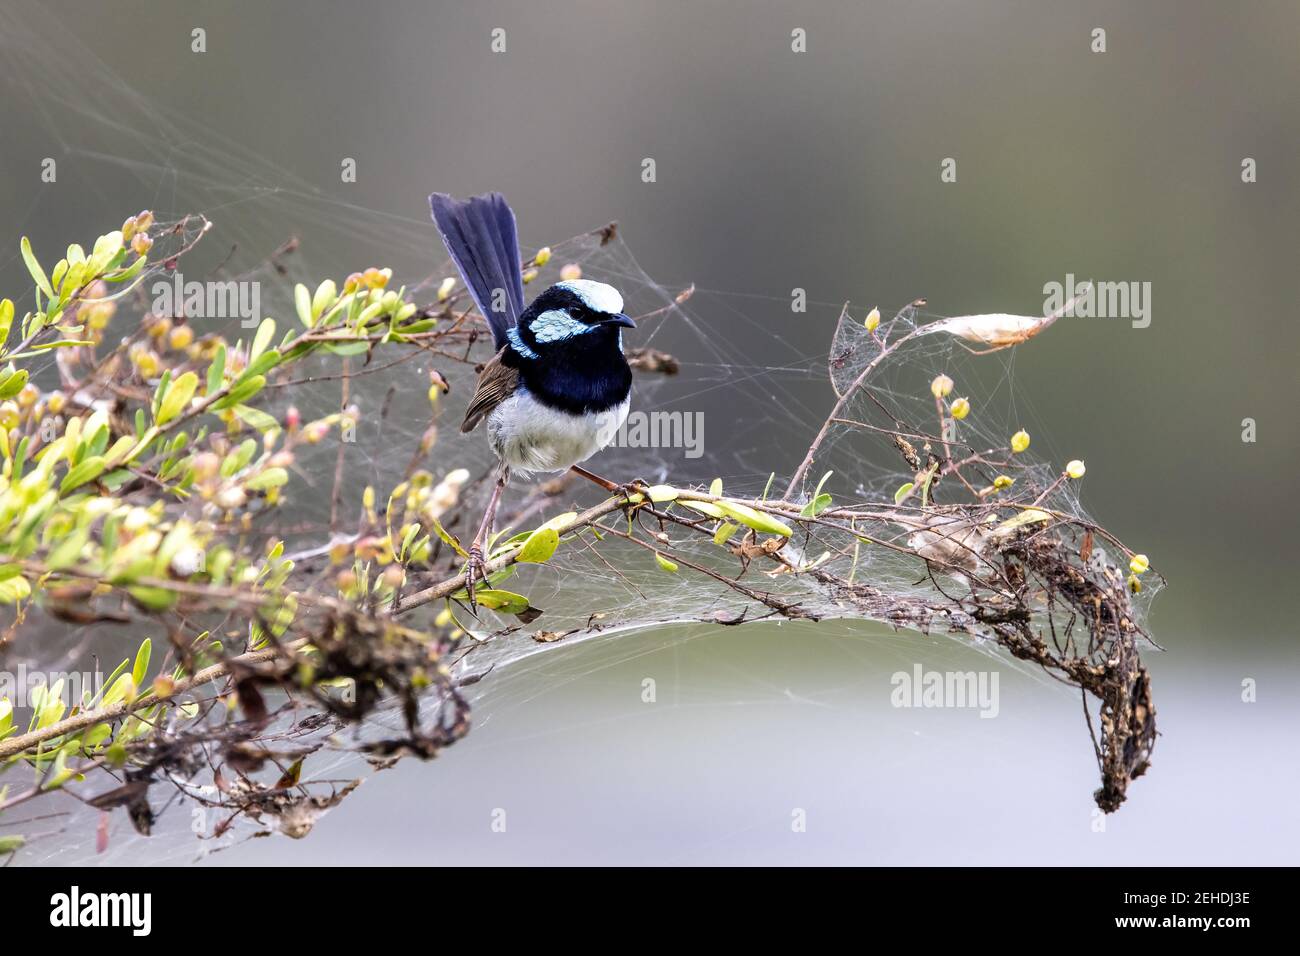 Male Superb Fairywren perched in shrub with spider webs Stock Photo